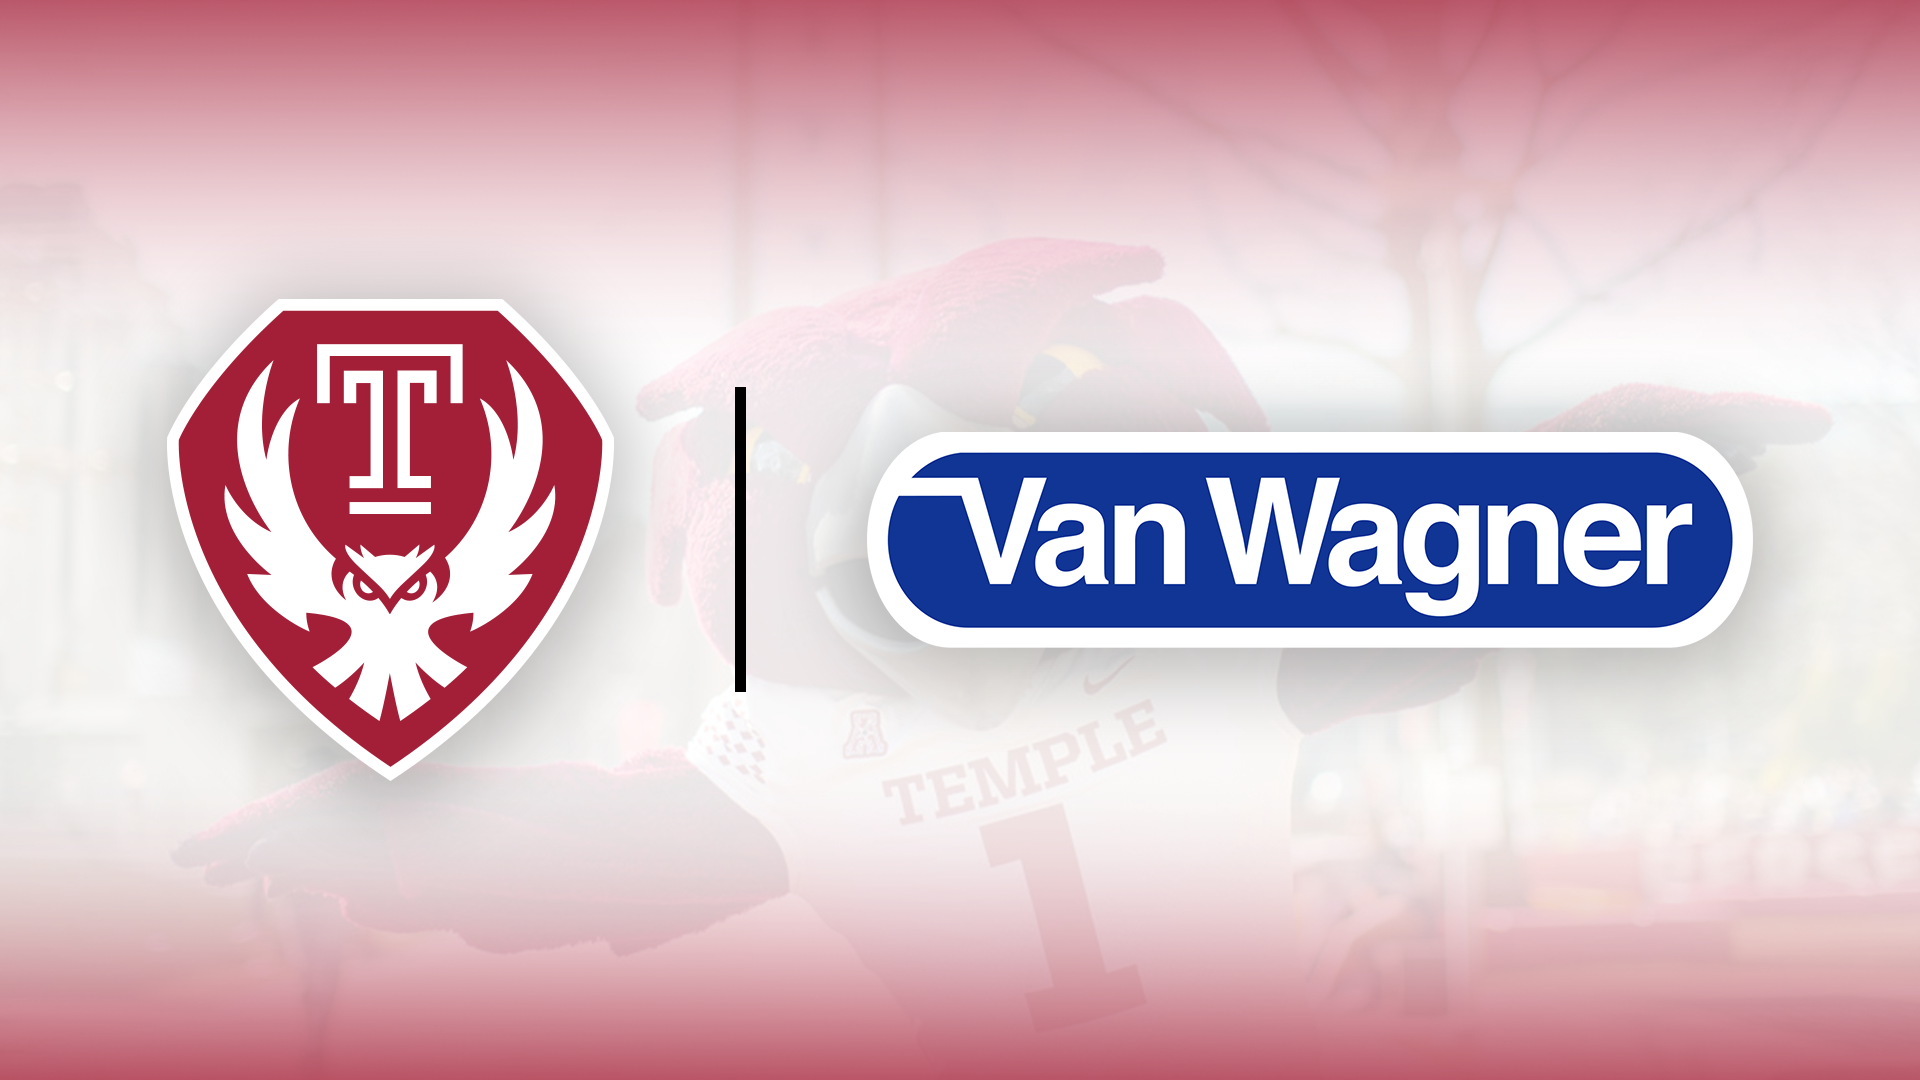 Temple University Athletics Announces Multi-Year Multimedia Rights Partnership with Van Wagner featured image